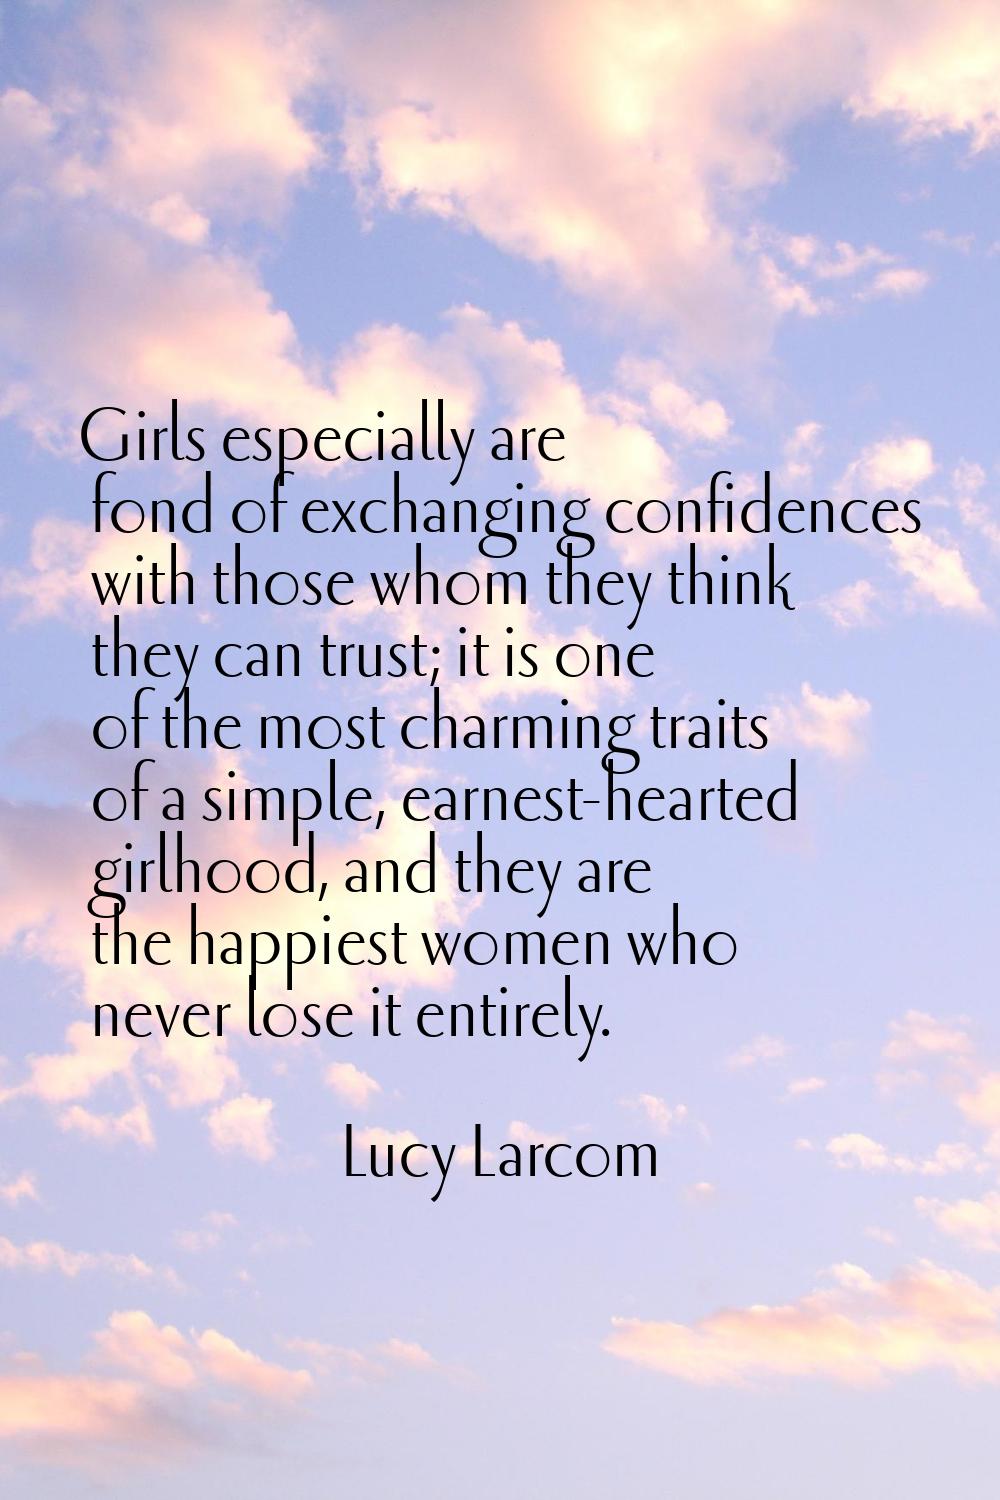 Girls especially are fond of exchanging confidences with those whom they think they can trust; it i